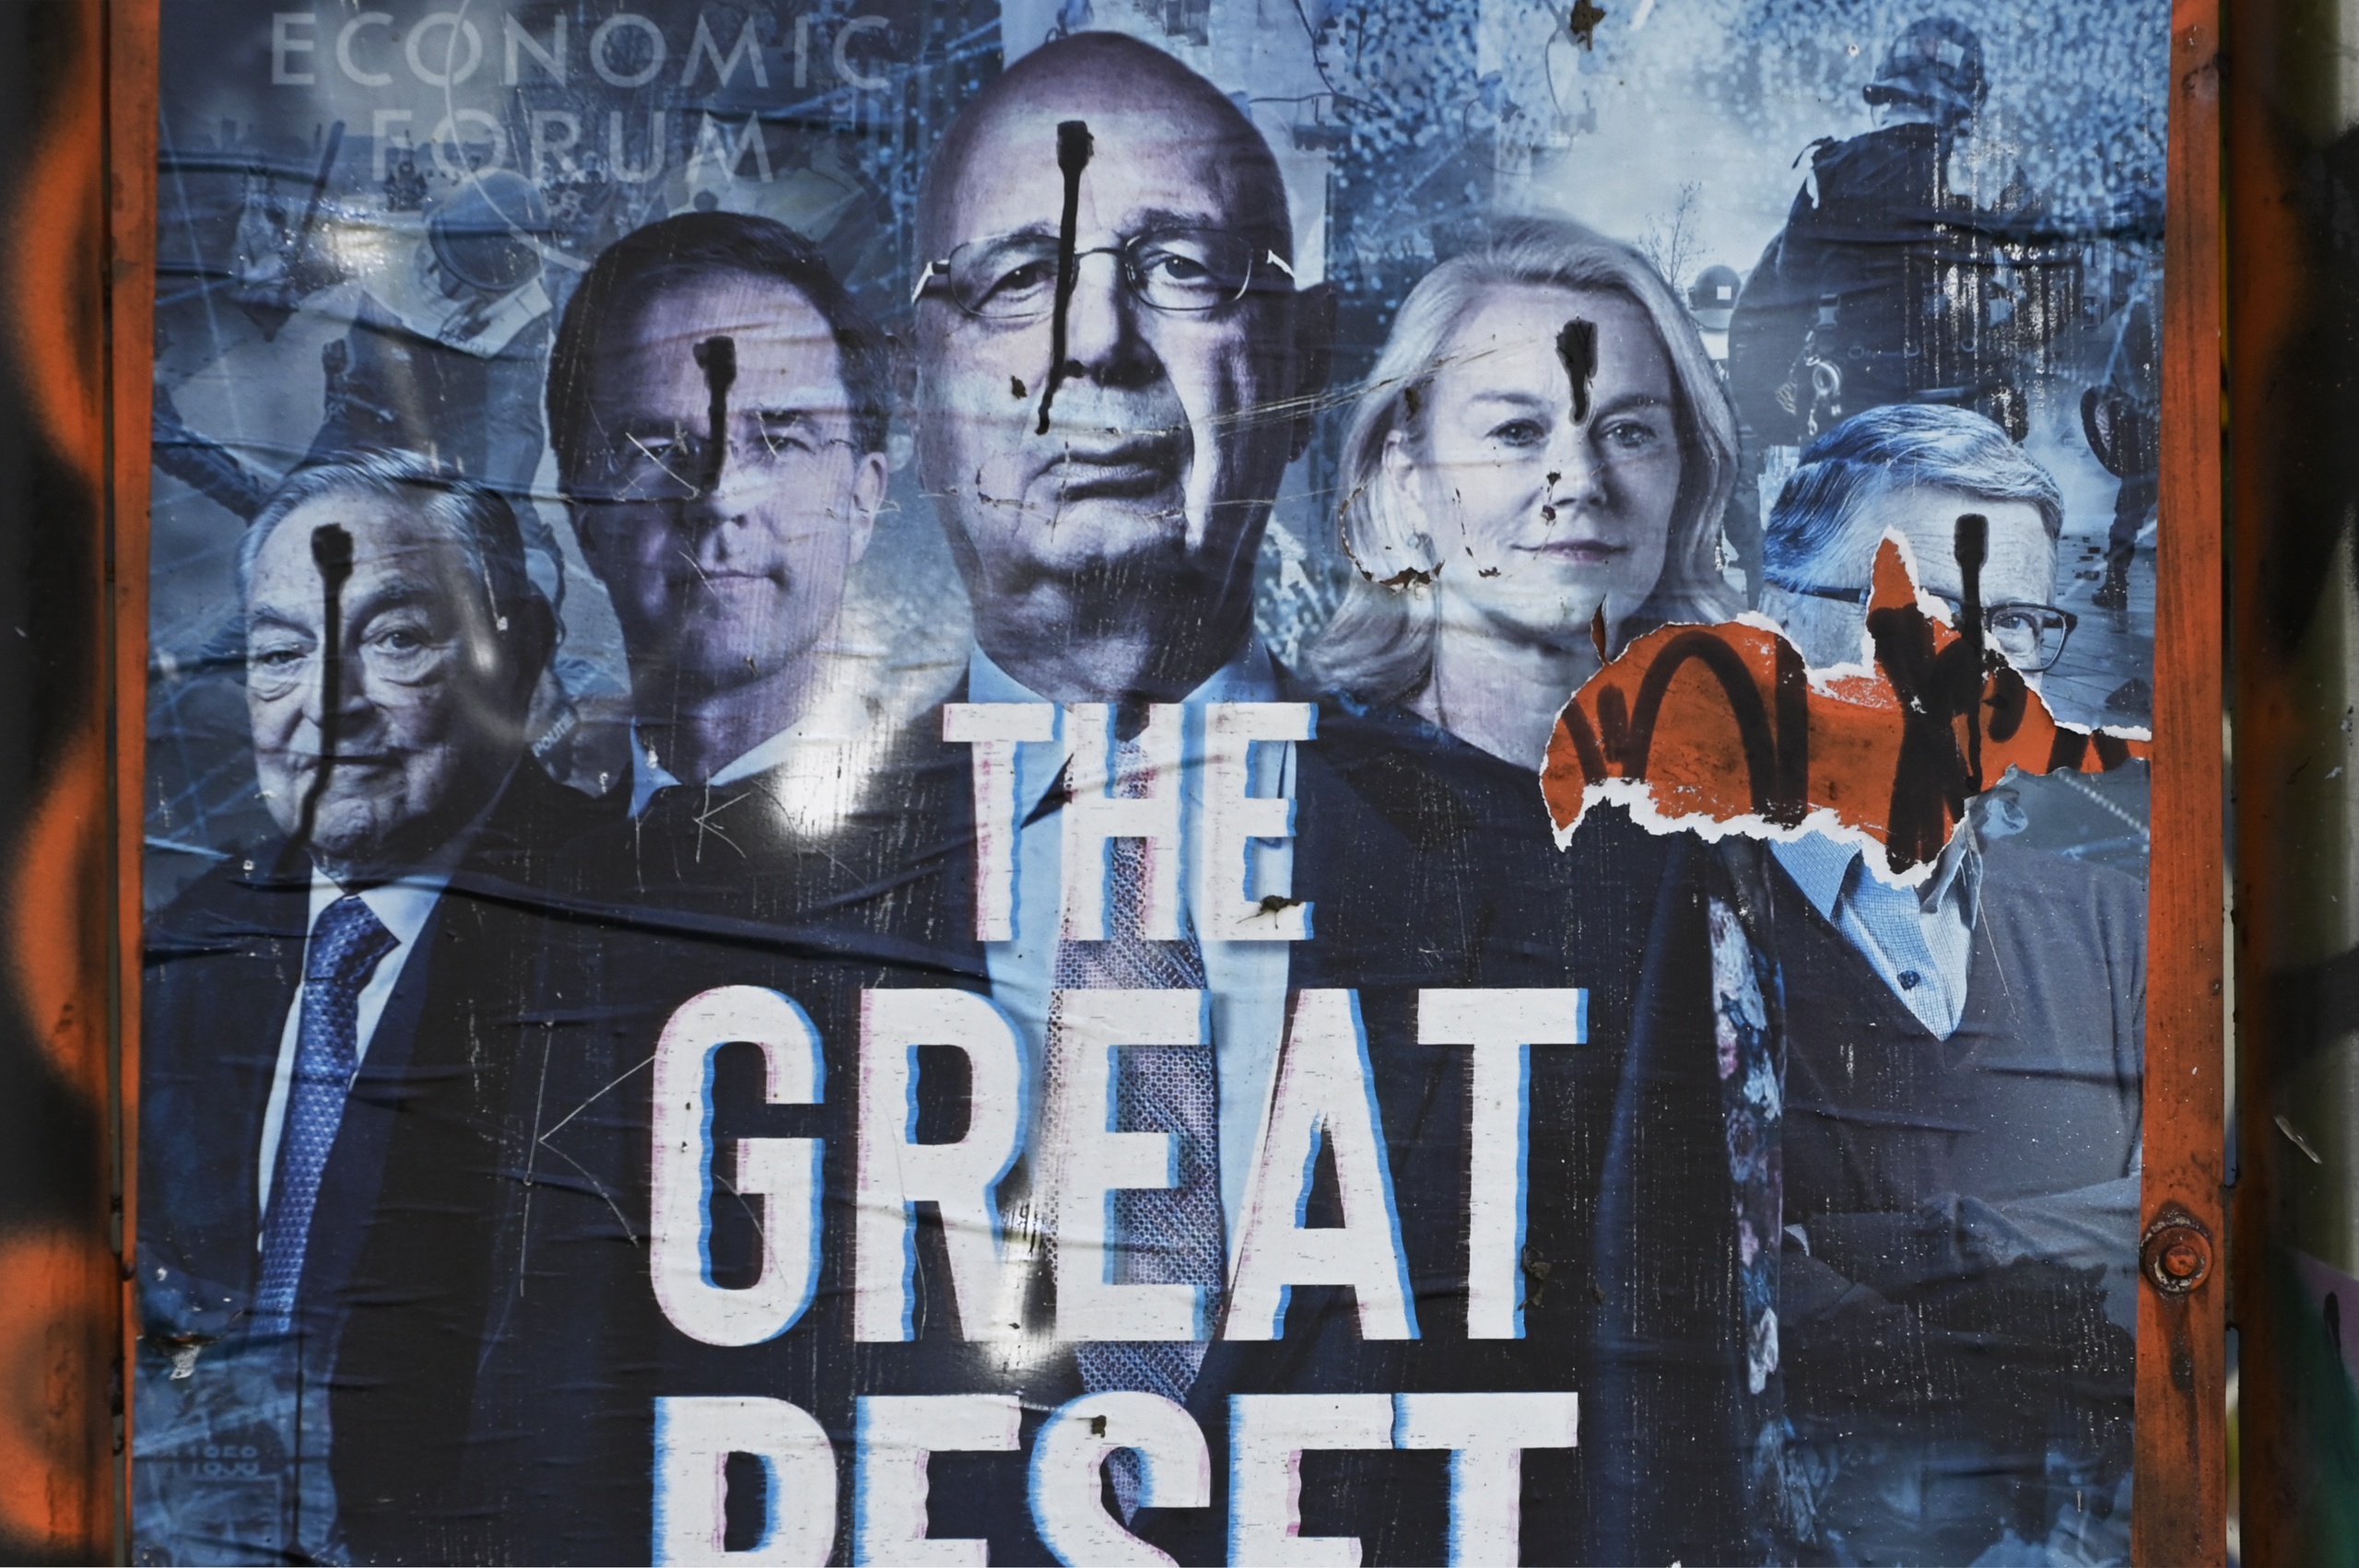 'The Great Reset' is the title of a policy proposal by the World Economic Forum, which some see as part of a global conspiracy. 